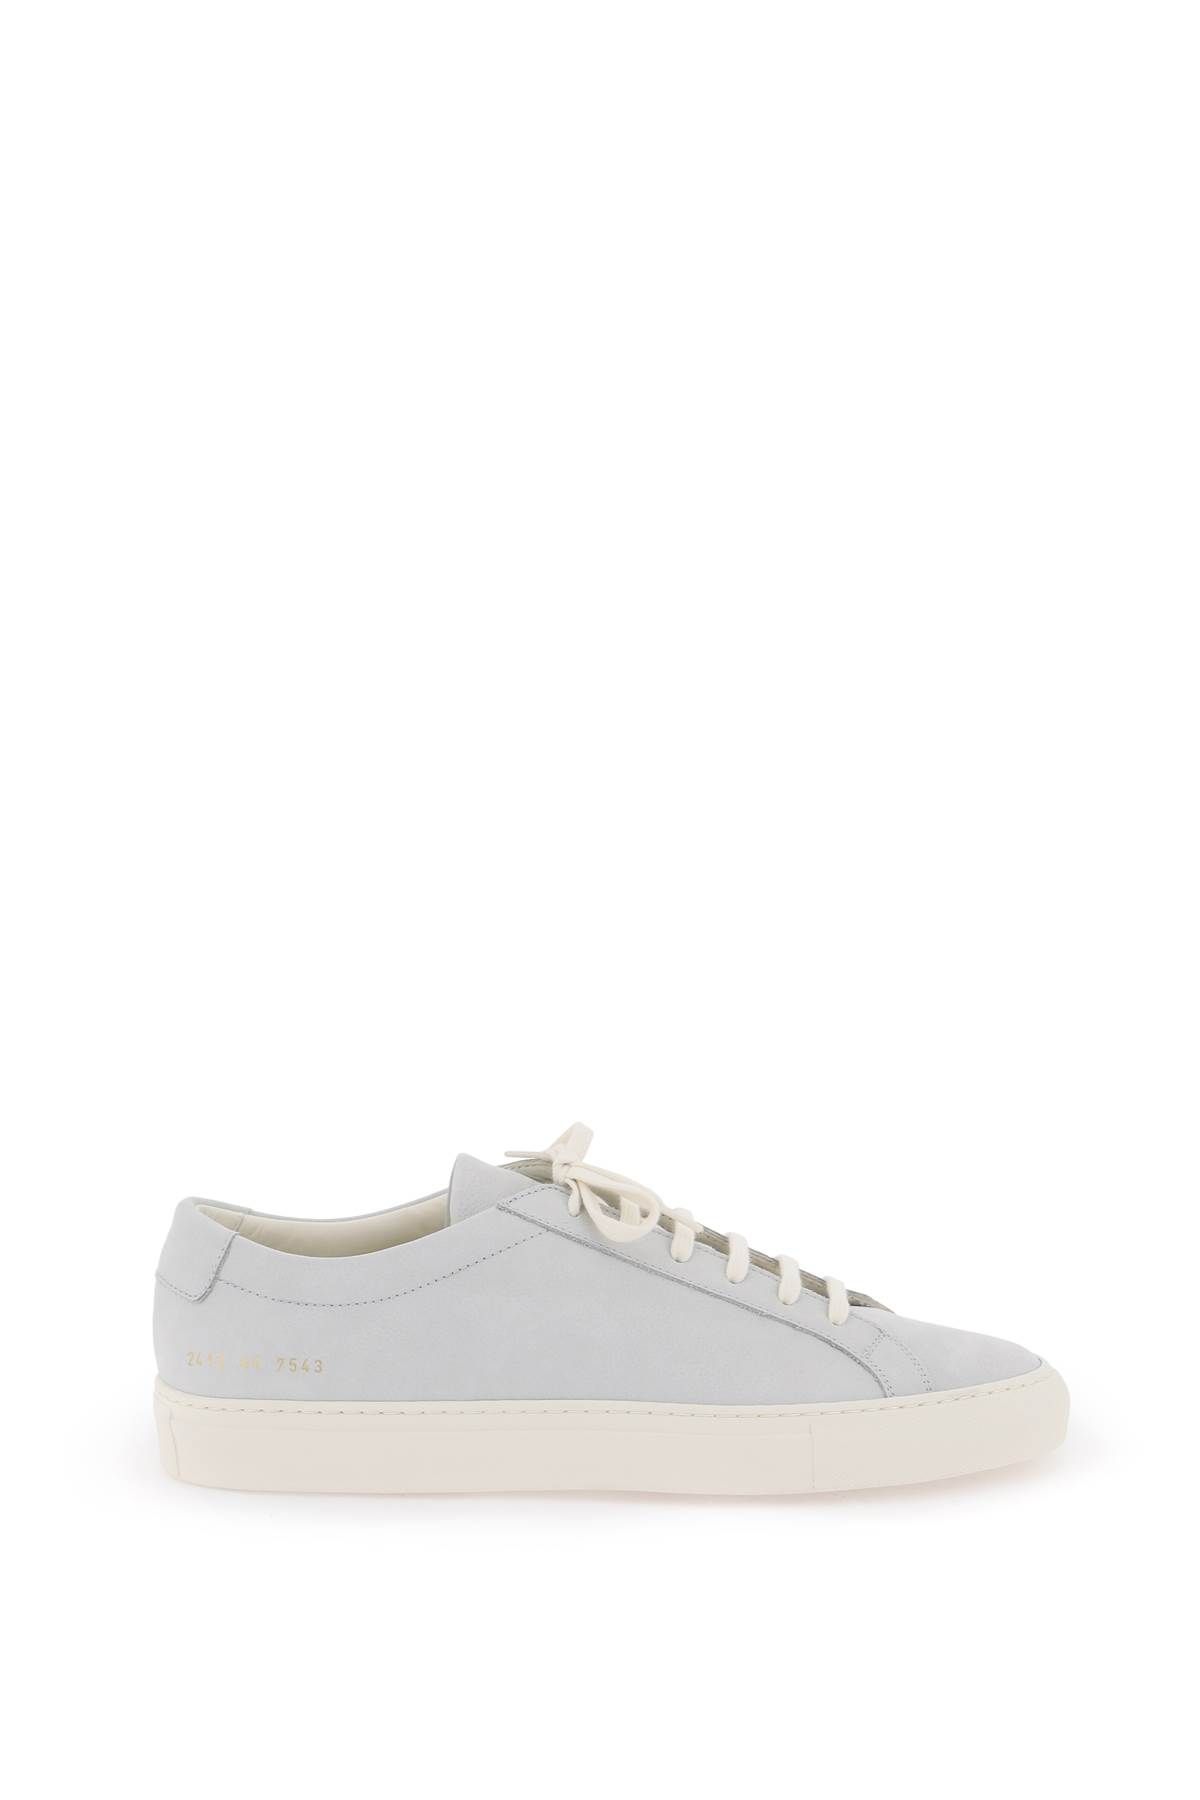 Shop Common Projects Original Achilles Leather Sneakers In Grey